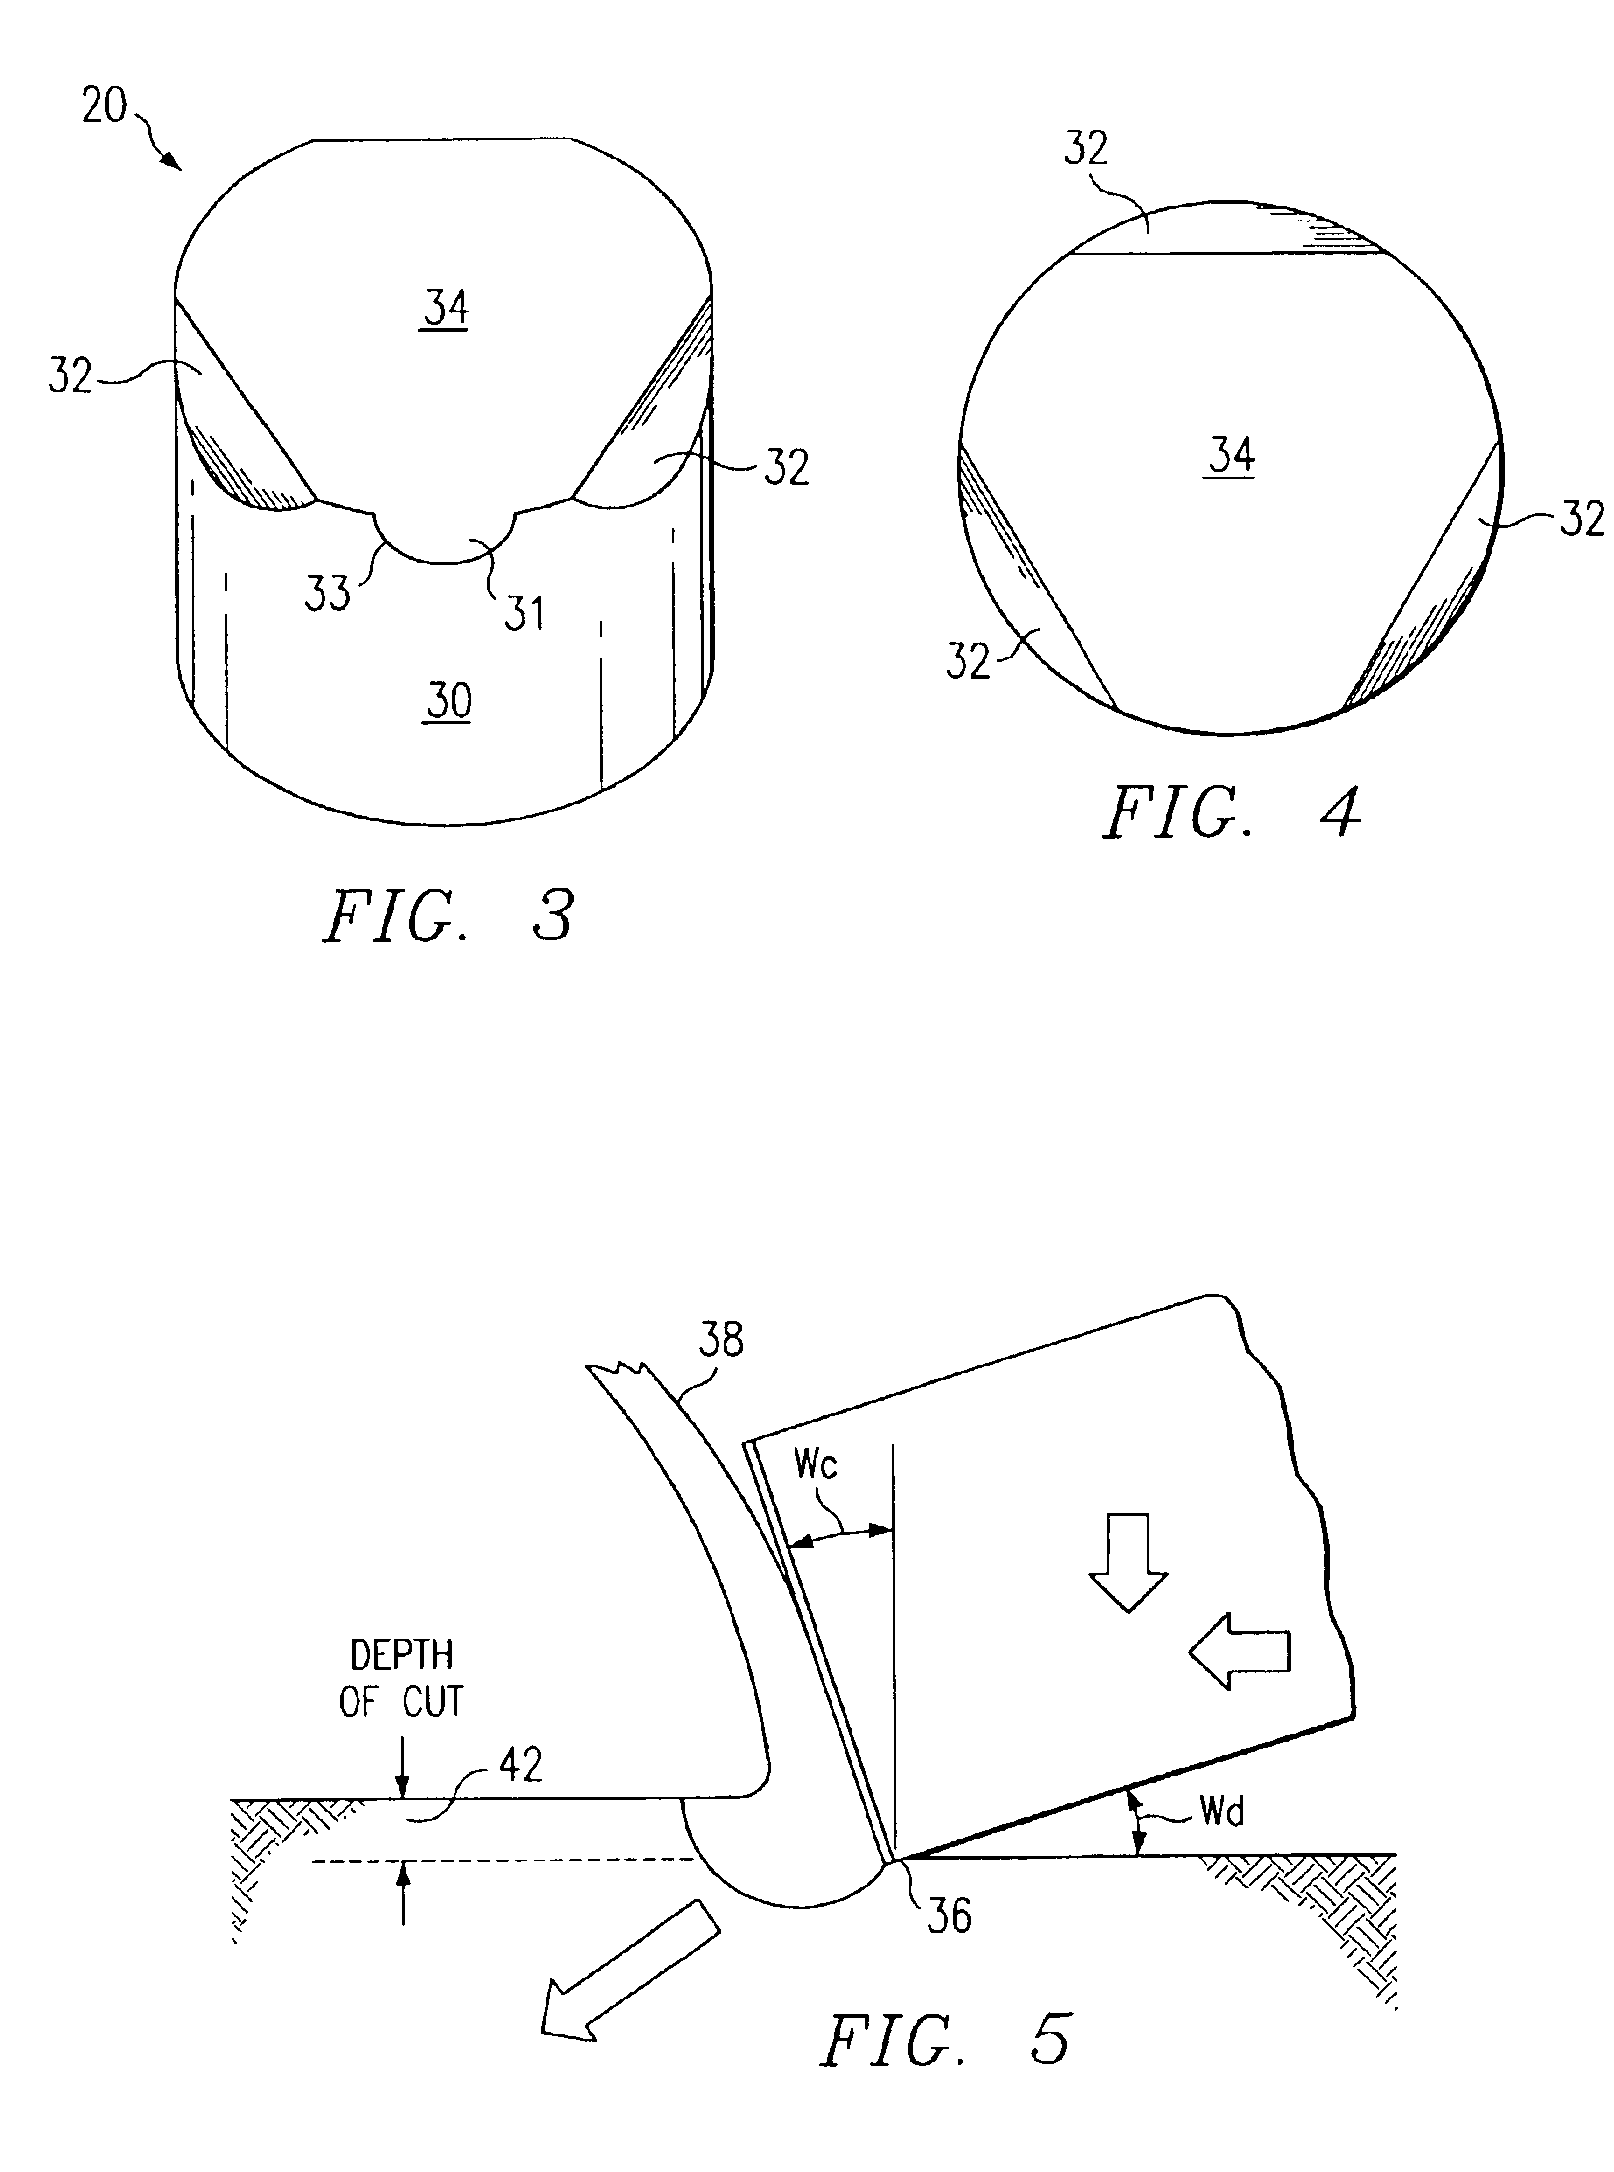 Low-contact area cutting element